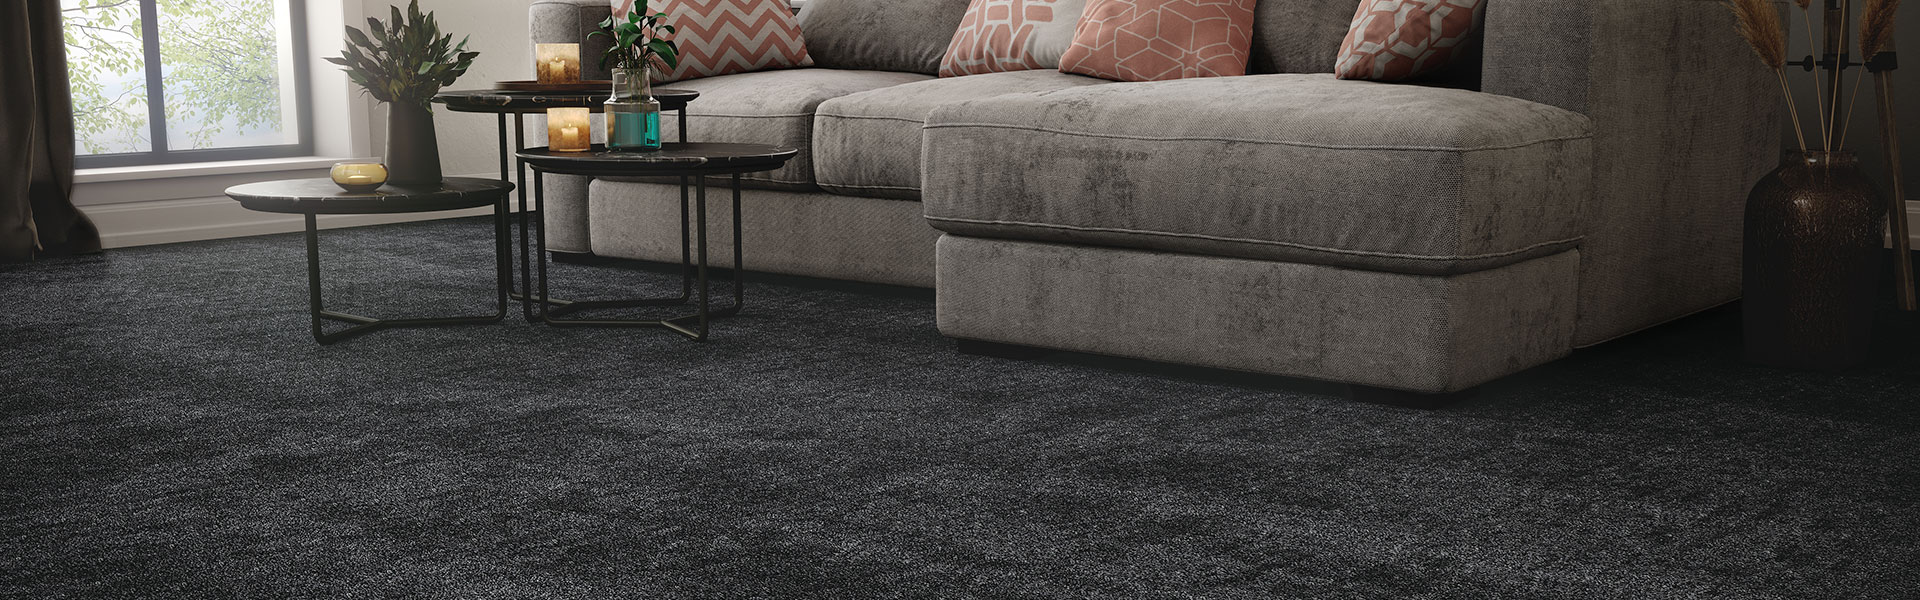 bang høste partner Couture Home is a beautifully soft carpet for residential use